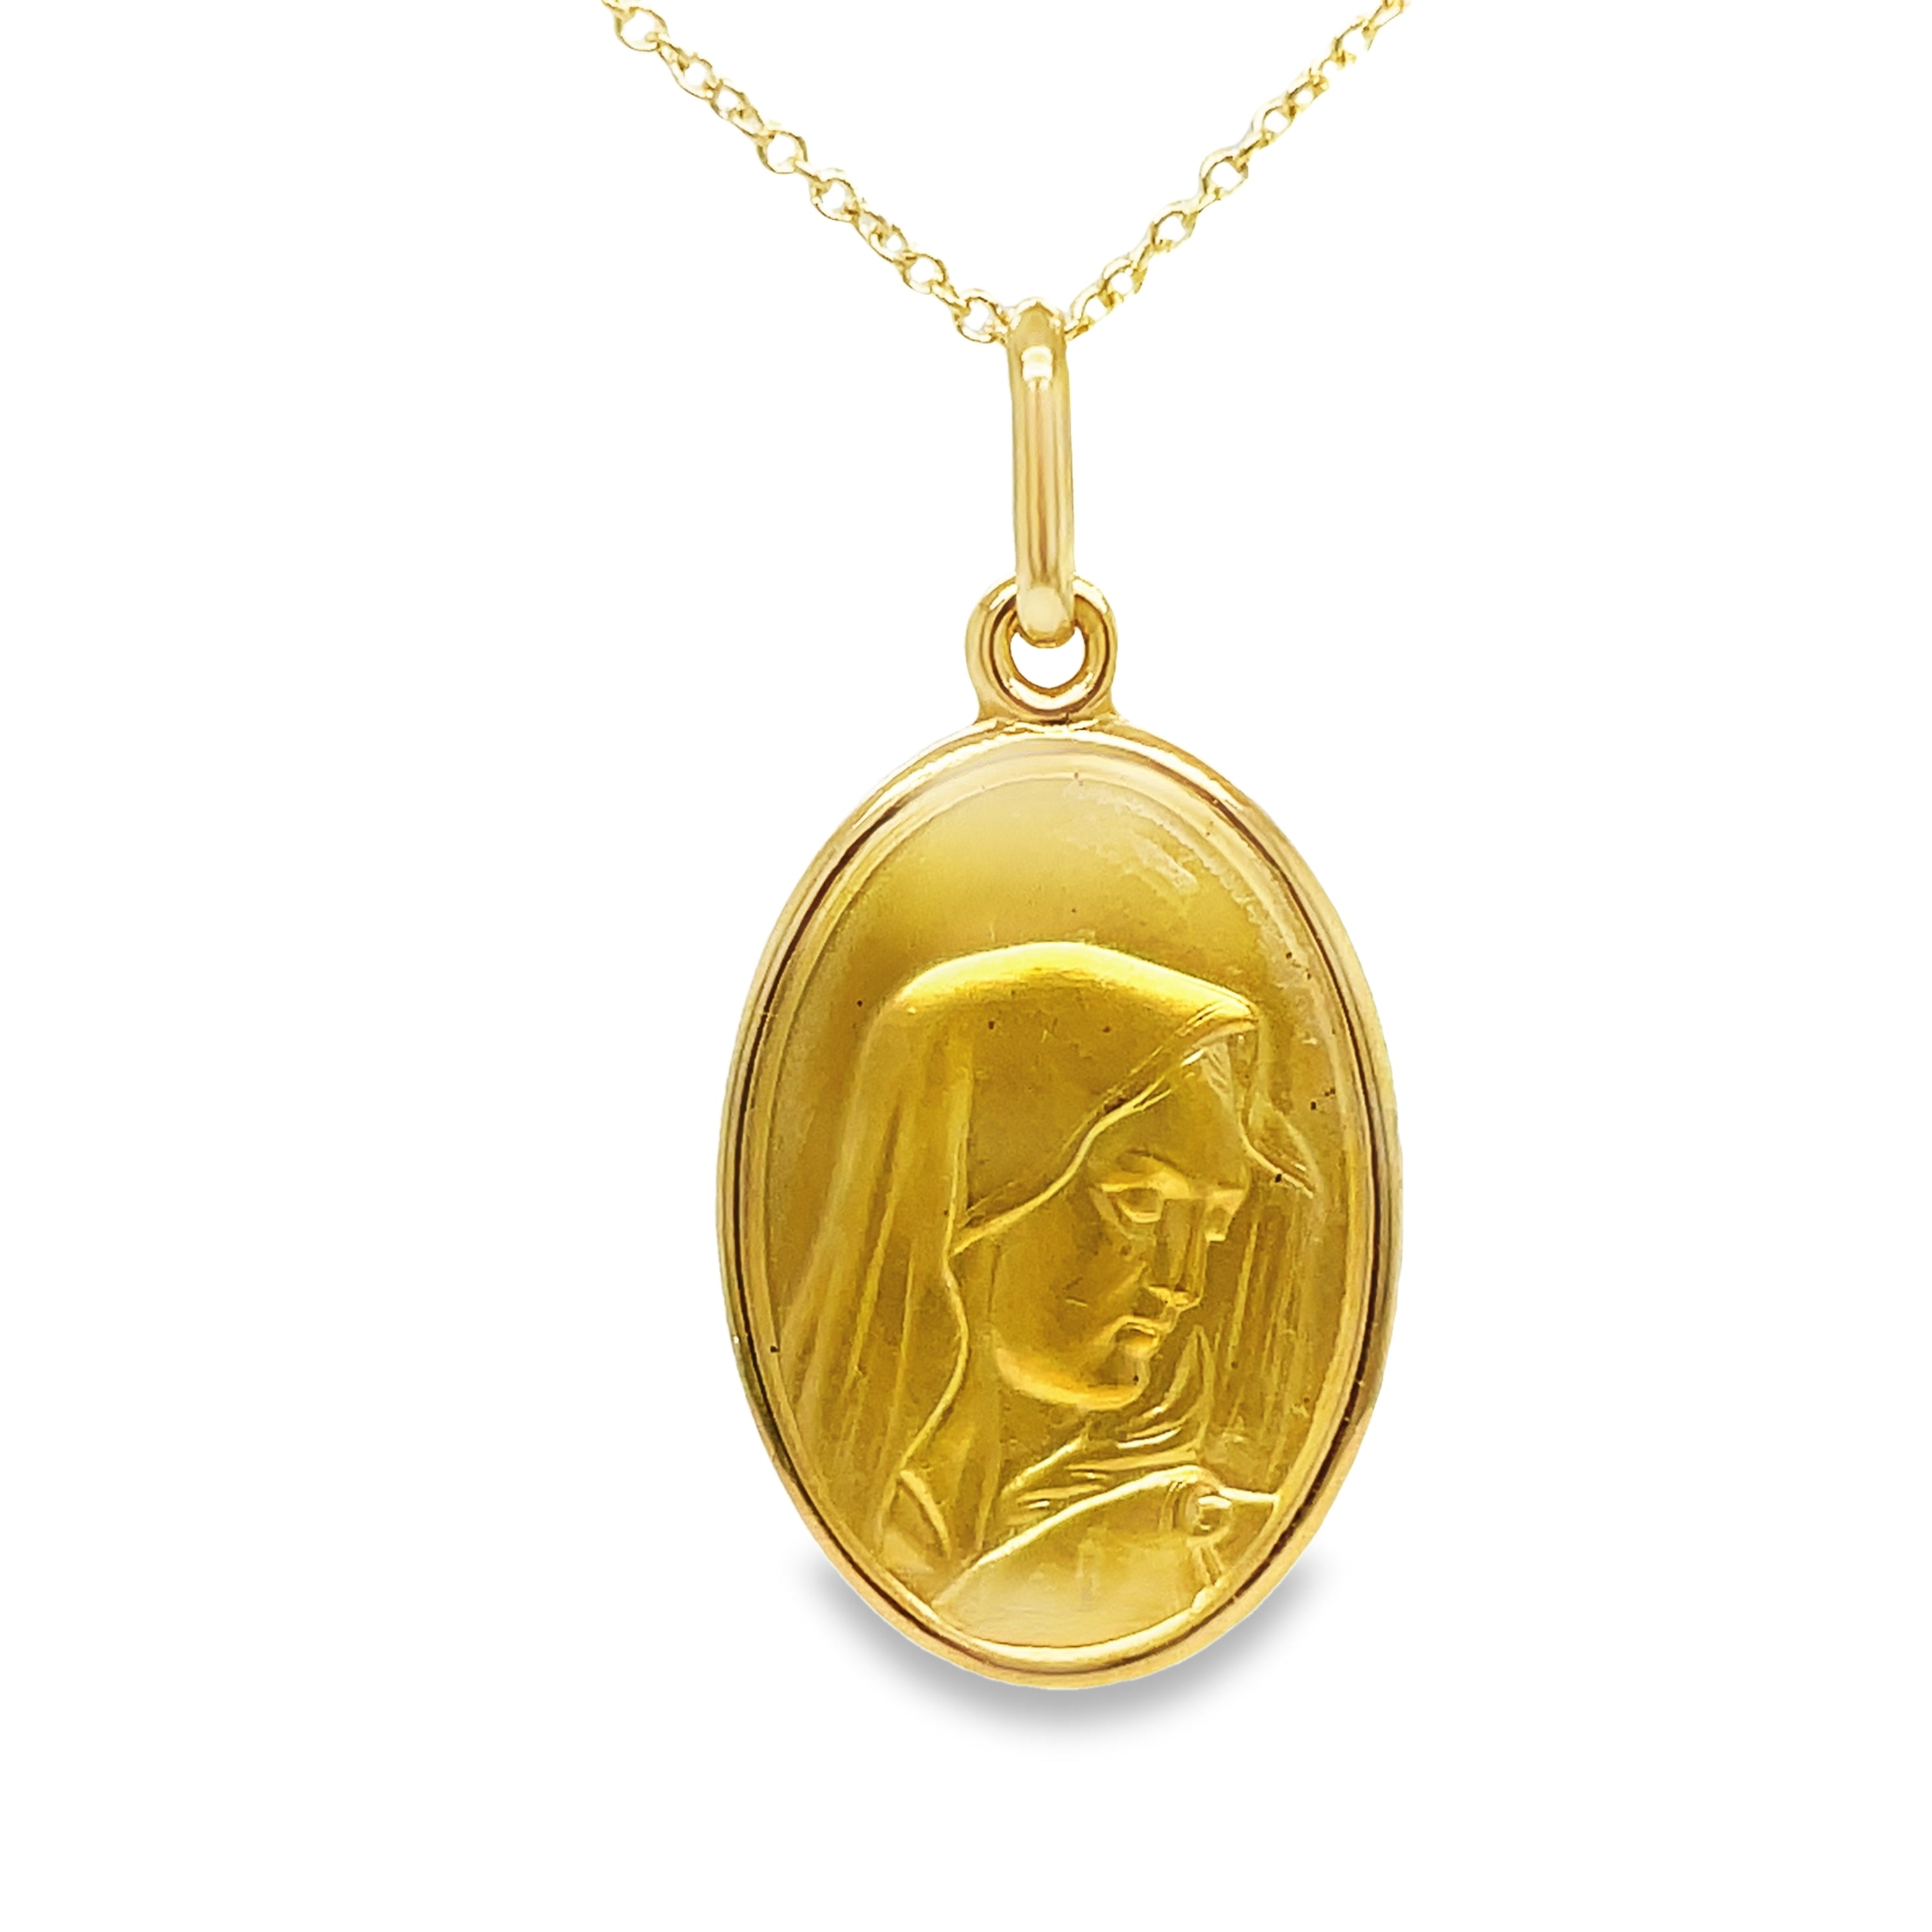 Crafted with 18k Italian yellow gold, this pendant necklace features a stunning Madonna Virgin medal with a matte finish. Measuring 27.00 x 15.00 mm, this elegant piece is a beautiful addition to any jewelry collection. Chain sold separately for $350.00 (18K). Enhance your style with this exquisite necklace.